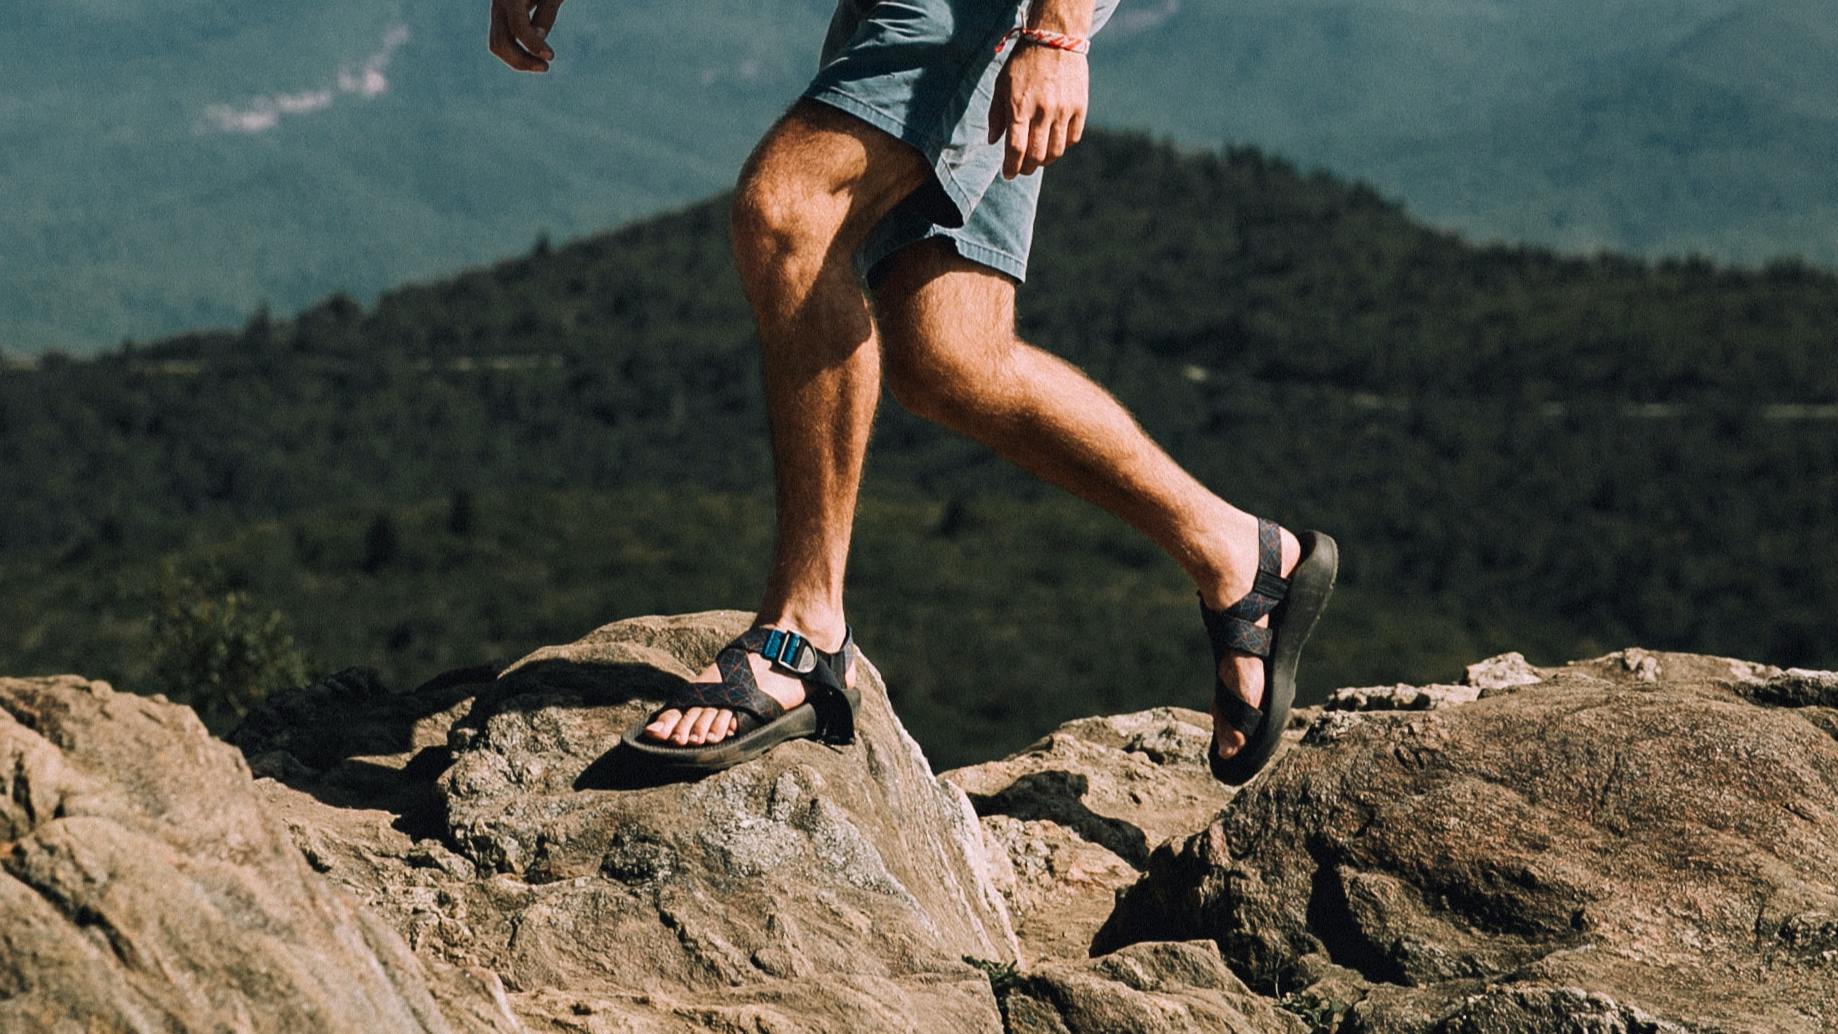 A man in sandals hikes on a rocky ridgeline.